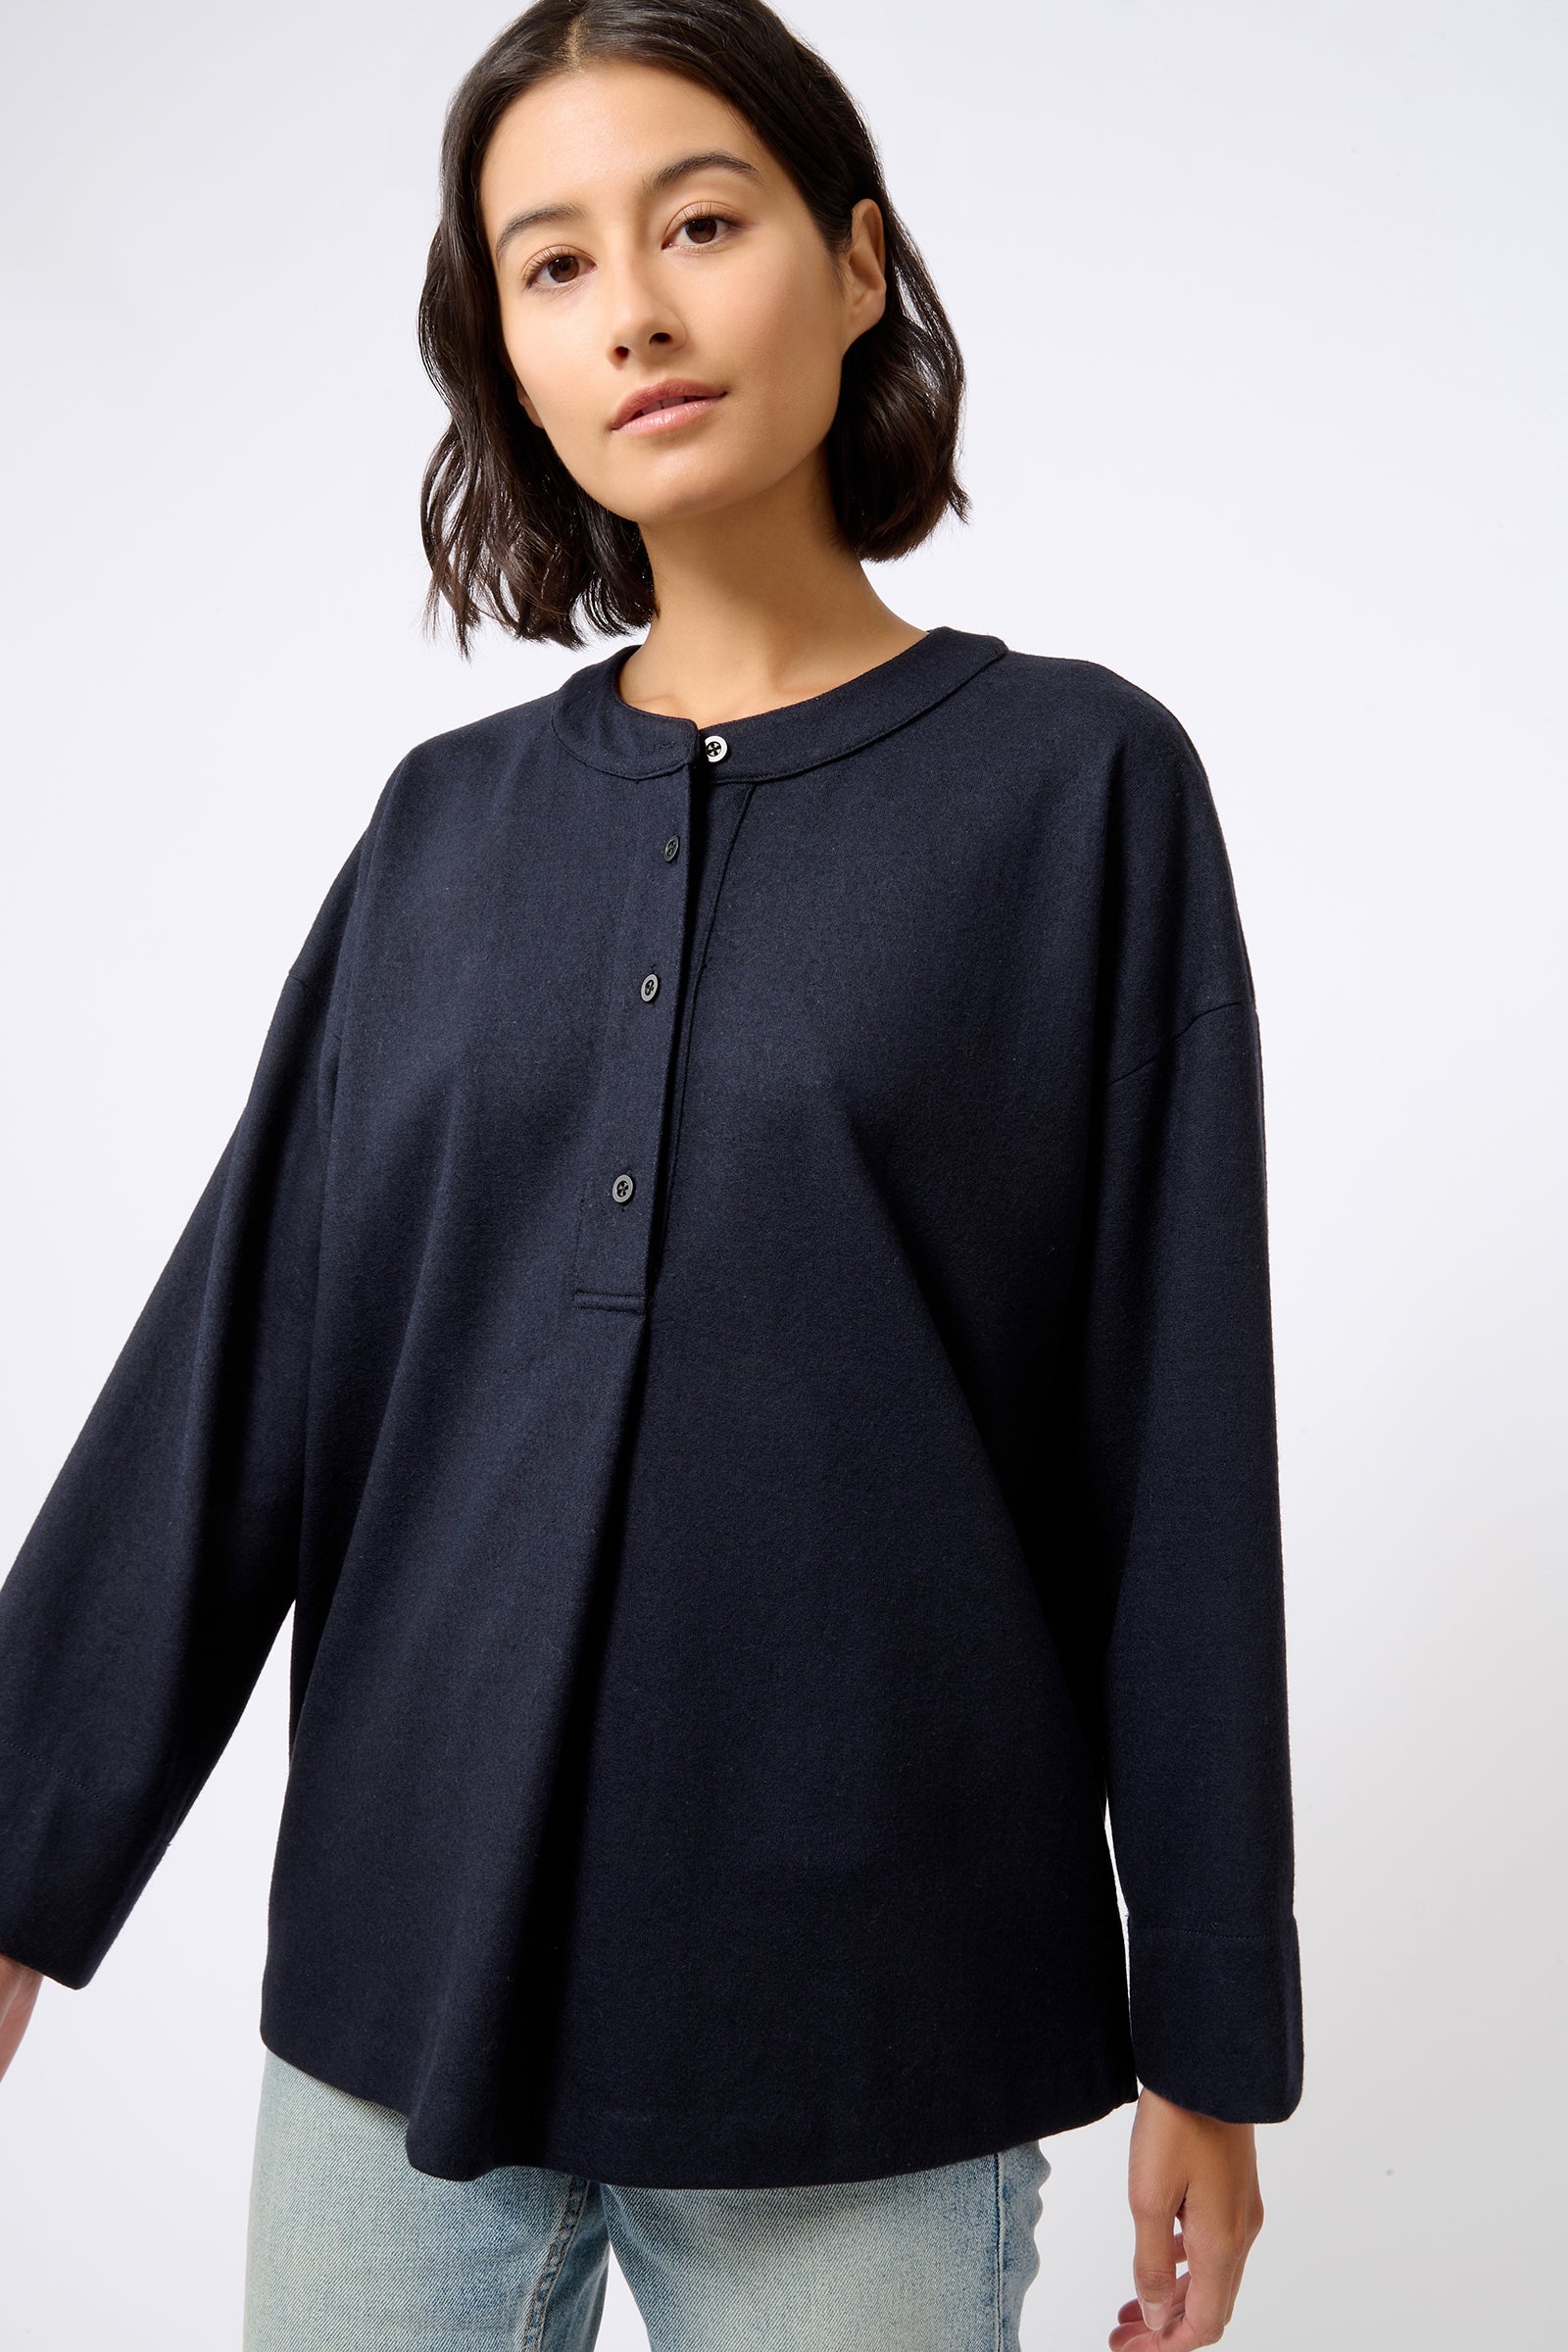 Kal Rieman Band Collar Top in Midnight on Model with Right Arm Out Front View